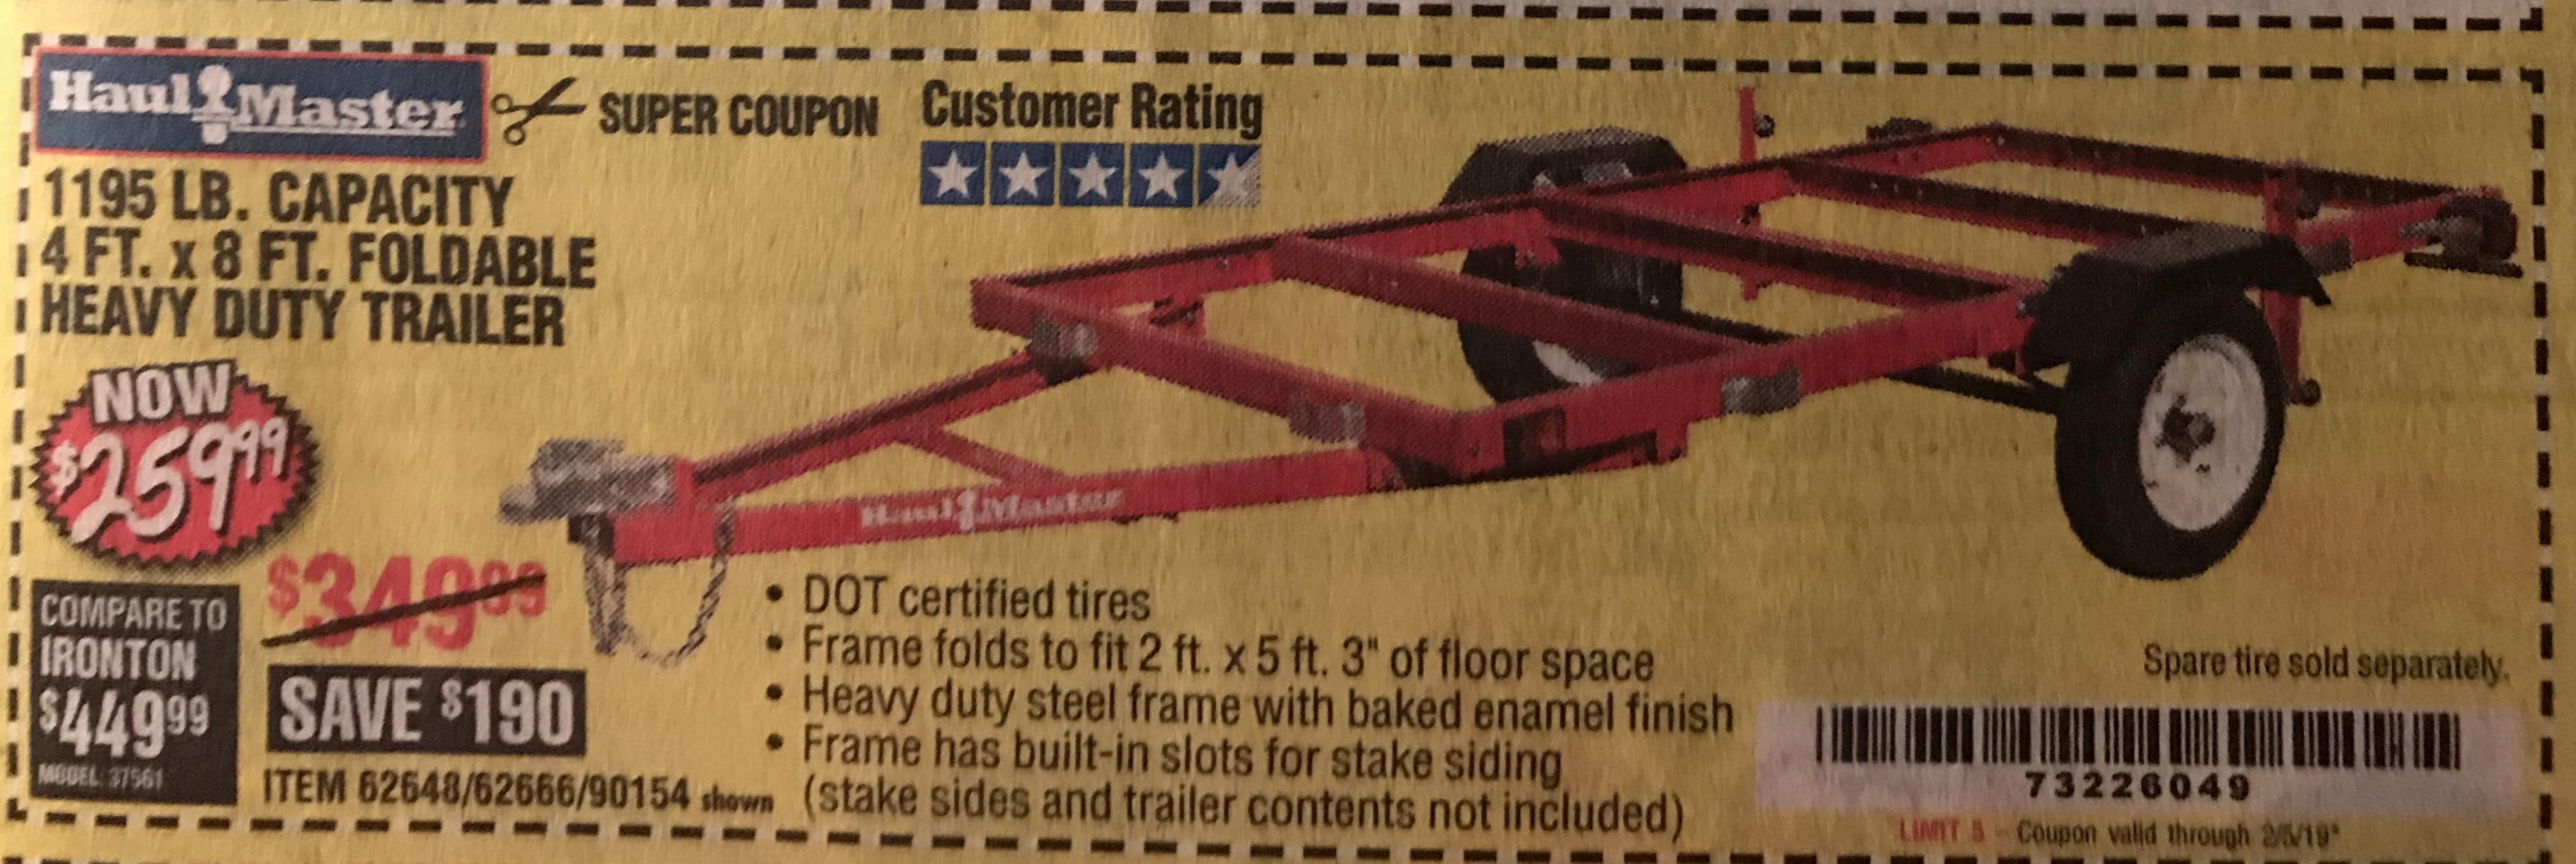 HAUL-MASTER 1195 Lb. Capacity 48 In. X 96 In. Heavy Duty Folding Trailer  for $269.99 – Harbor Freight Coupons